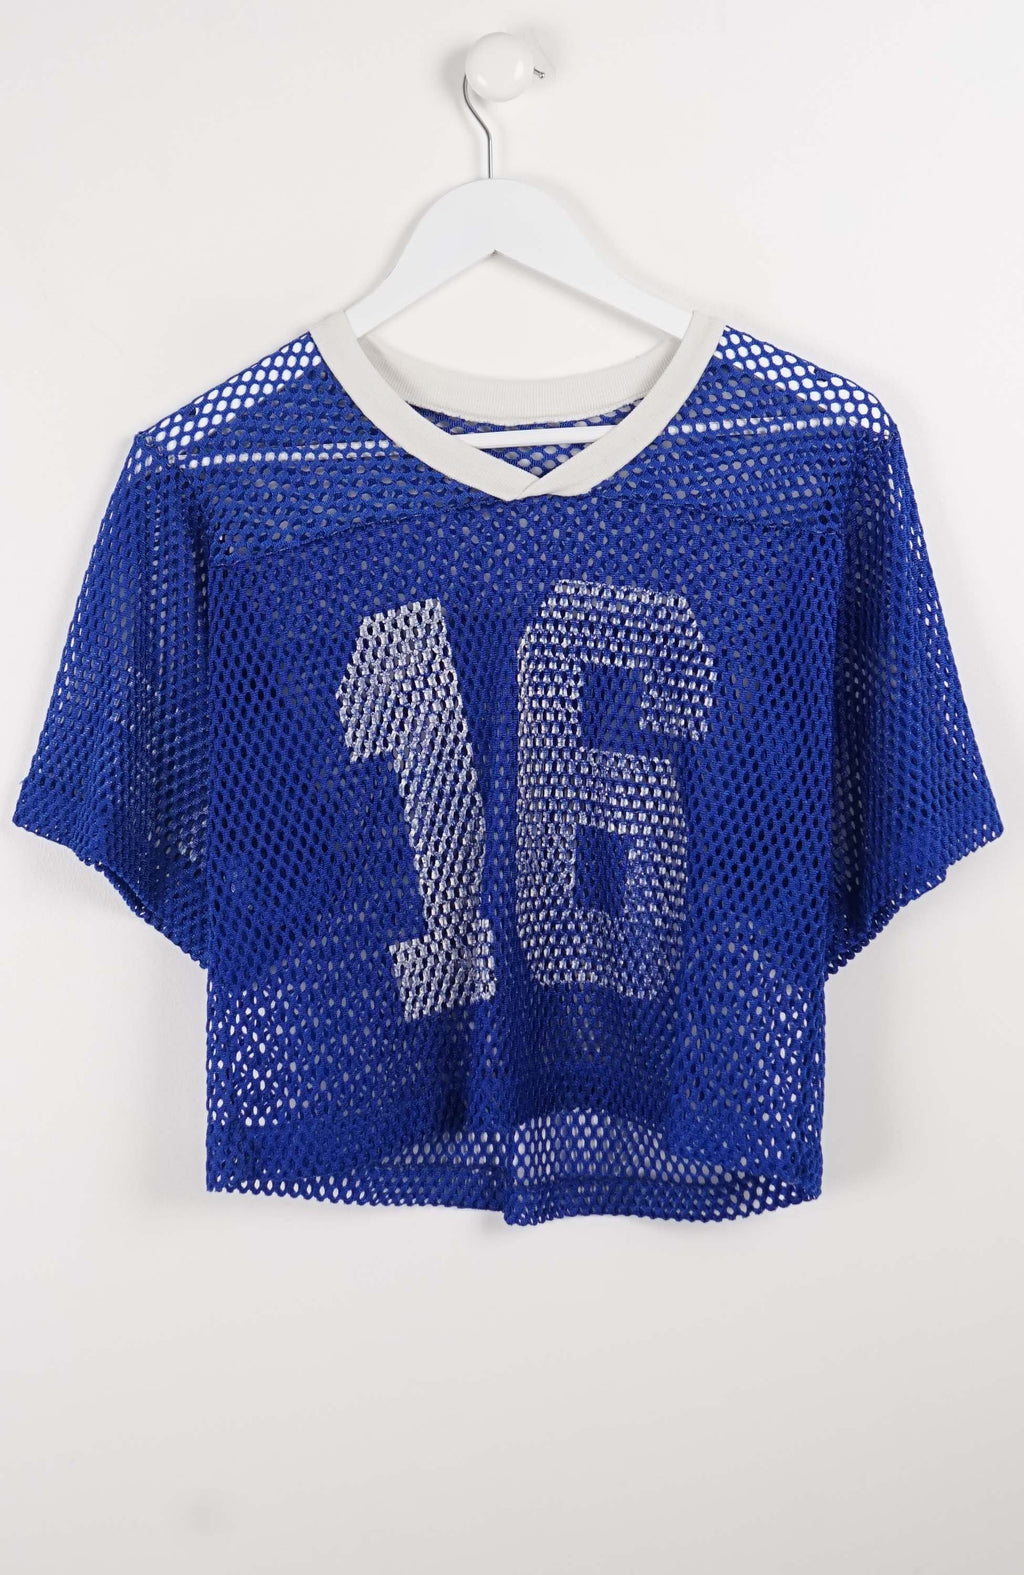 VINTAGE NFL FOOTBALL CROPPED JERSEY (S)